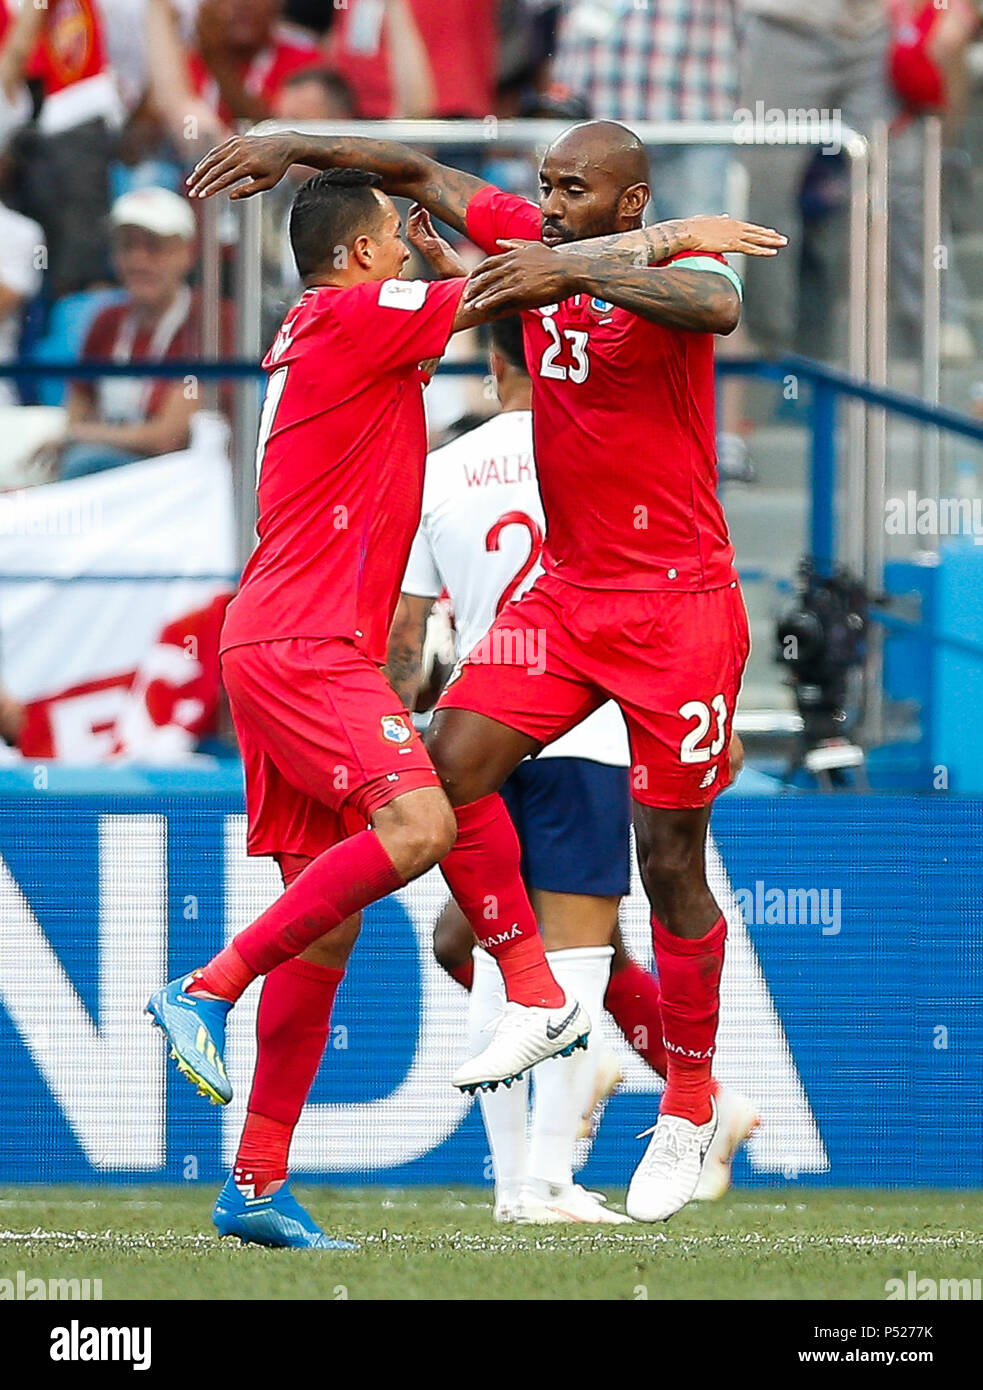 Nijni Novgorod, Russia. 24th June, 2018:ENGLAND VS. PANAMA - Felipe Baloy of Panama celebrates after scoring the first goal of Panama in the history of the World Cups during a match between England and Panama valid for the second round of group G of the 2018 World Cup, held at the Nizhny Novgorod stadium in the city of Nihzny Novgorod, Russia. (Photo: Marcelo Machado de Melo/Fotoarena) Credit: Foto Arena LTDA/Alamy Live News Stock Photo